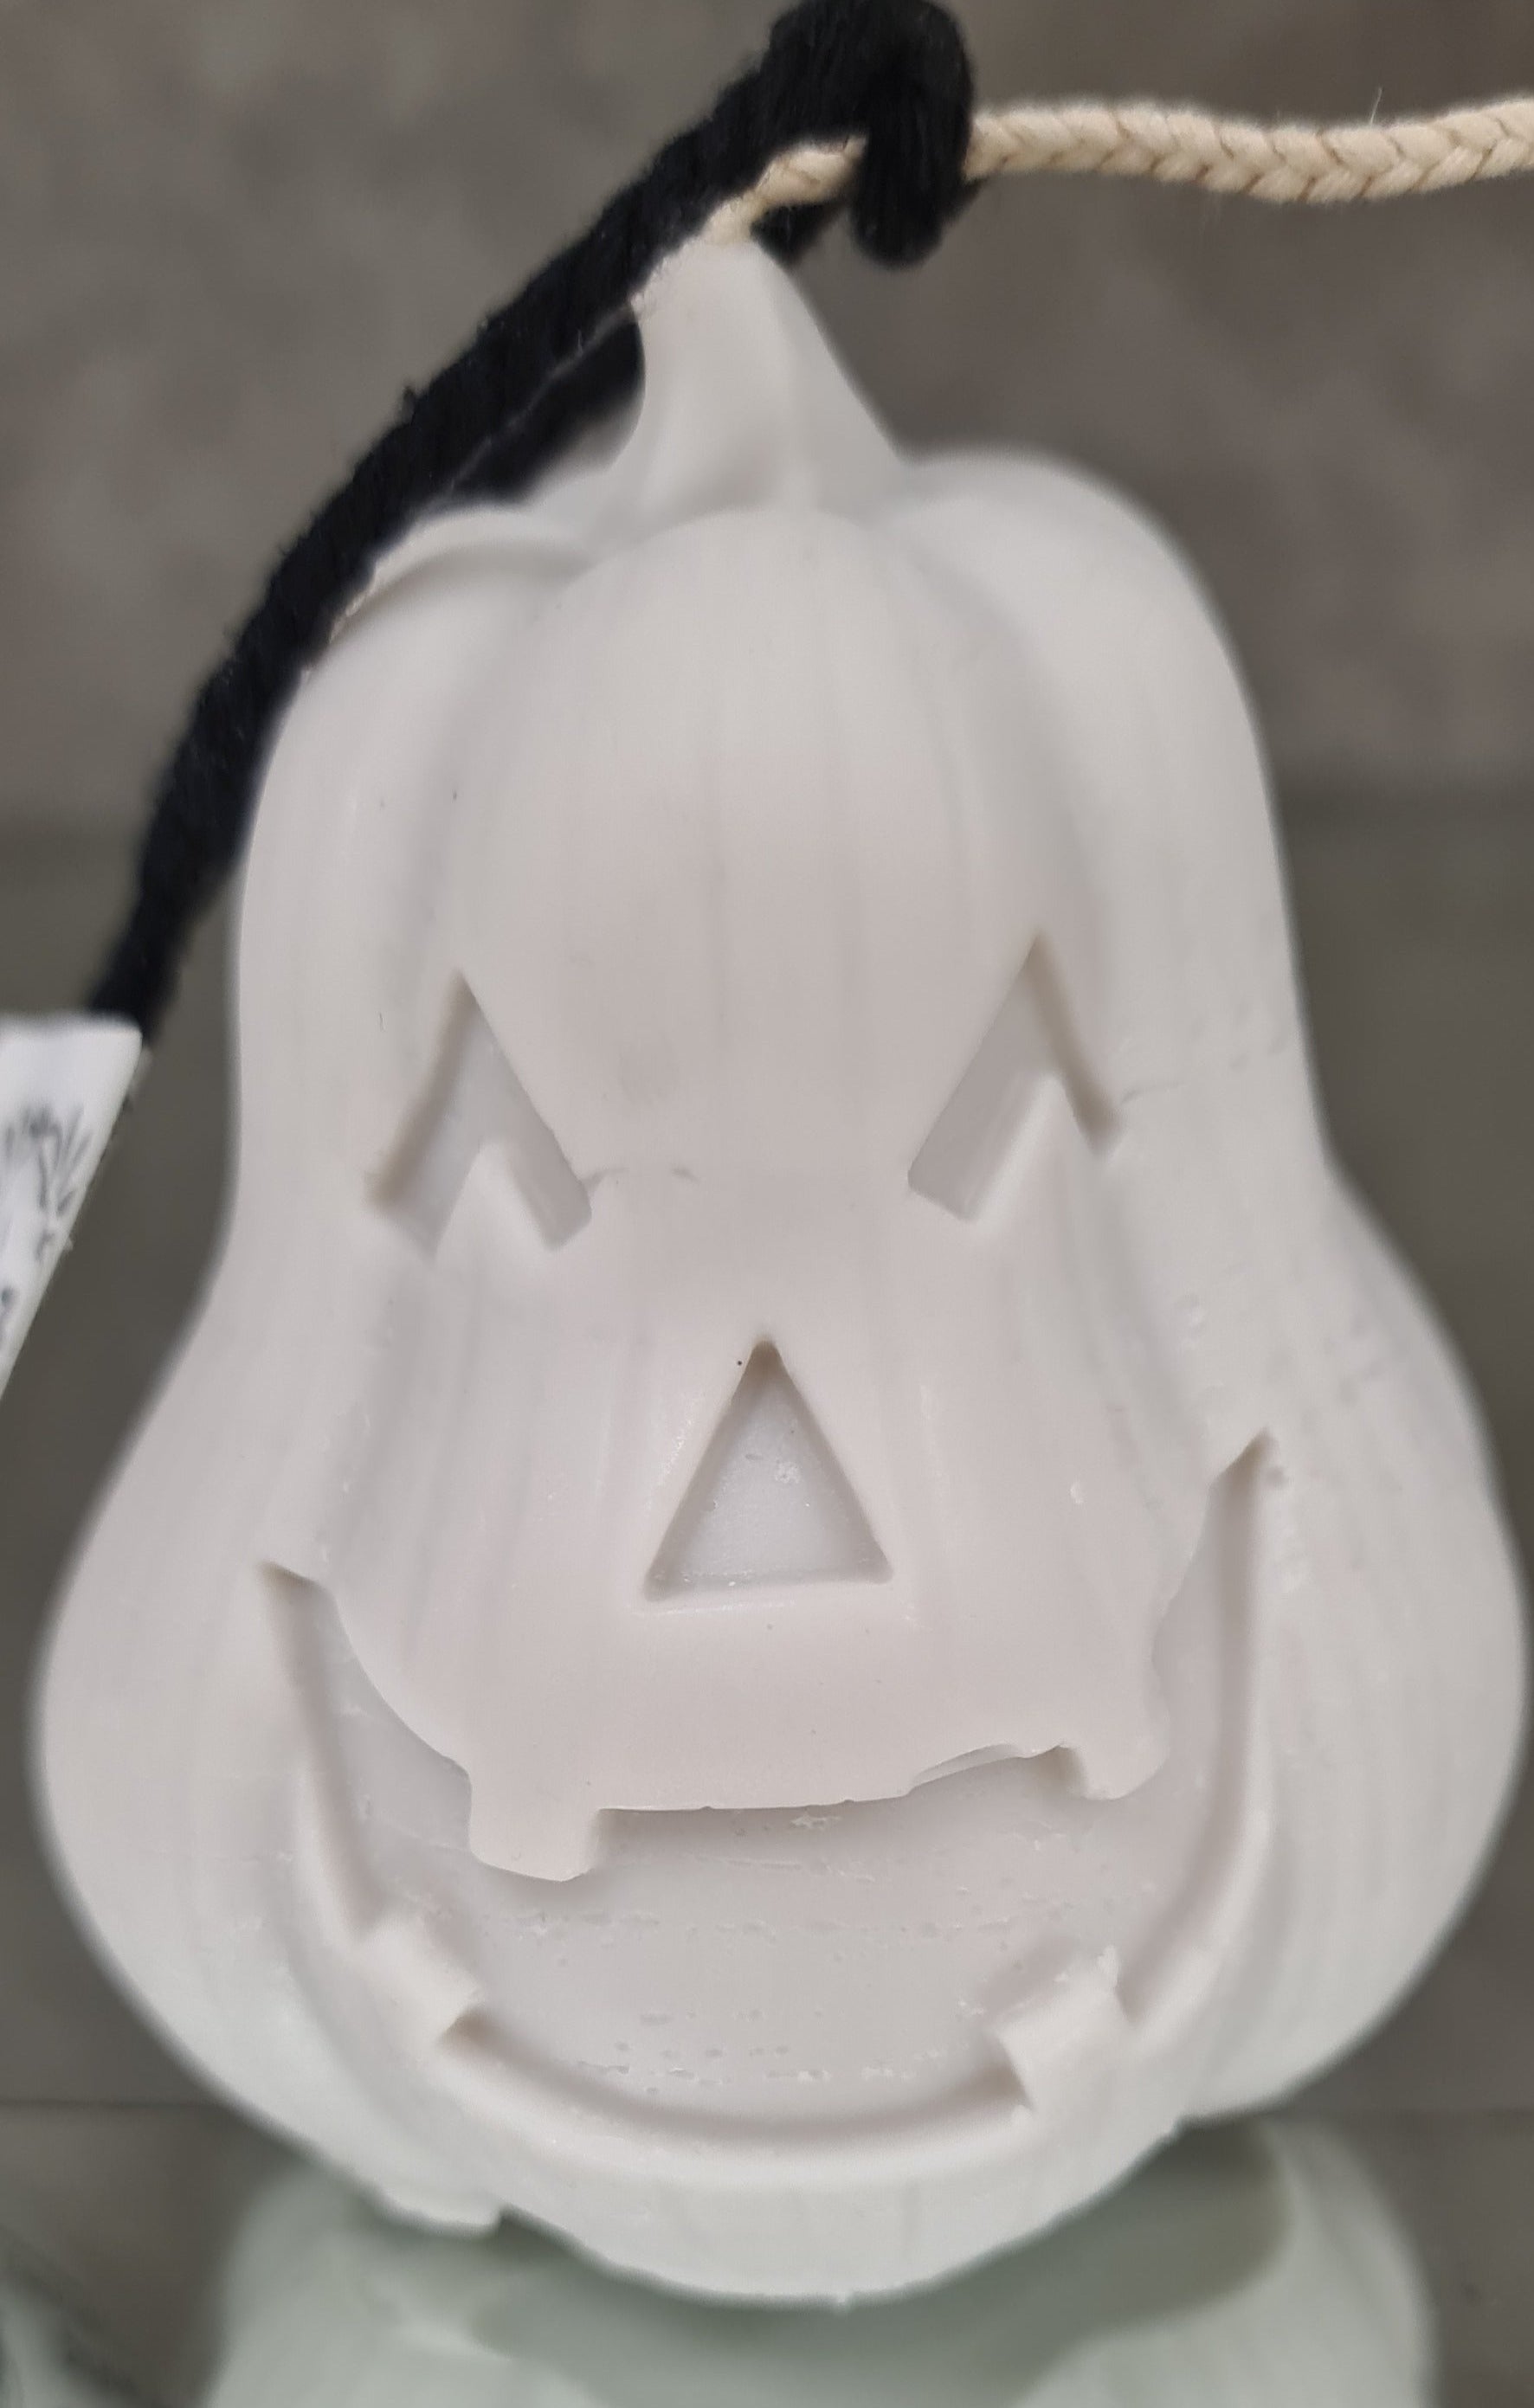 Close-up view of Pumpkin Enchantment Scented Candle, a whimsical pumpkin-shaped candle with a warm, flickering flame